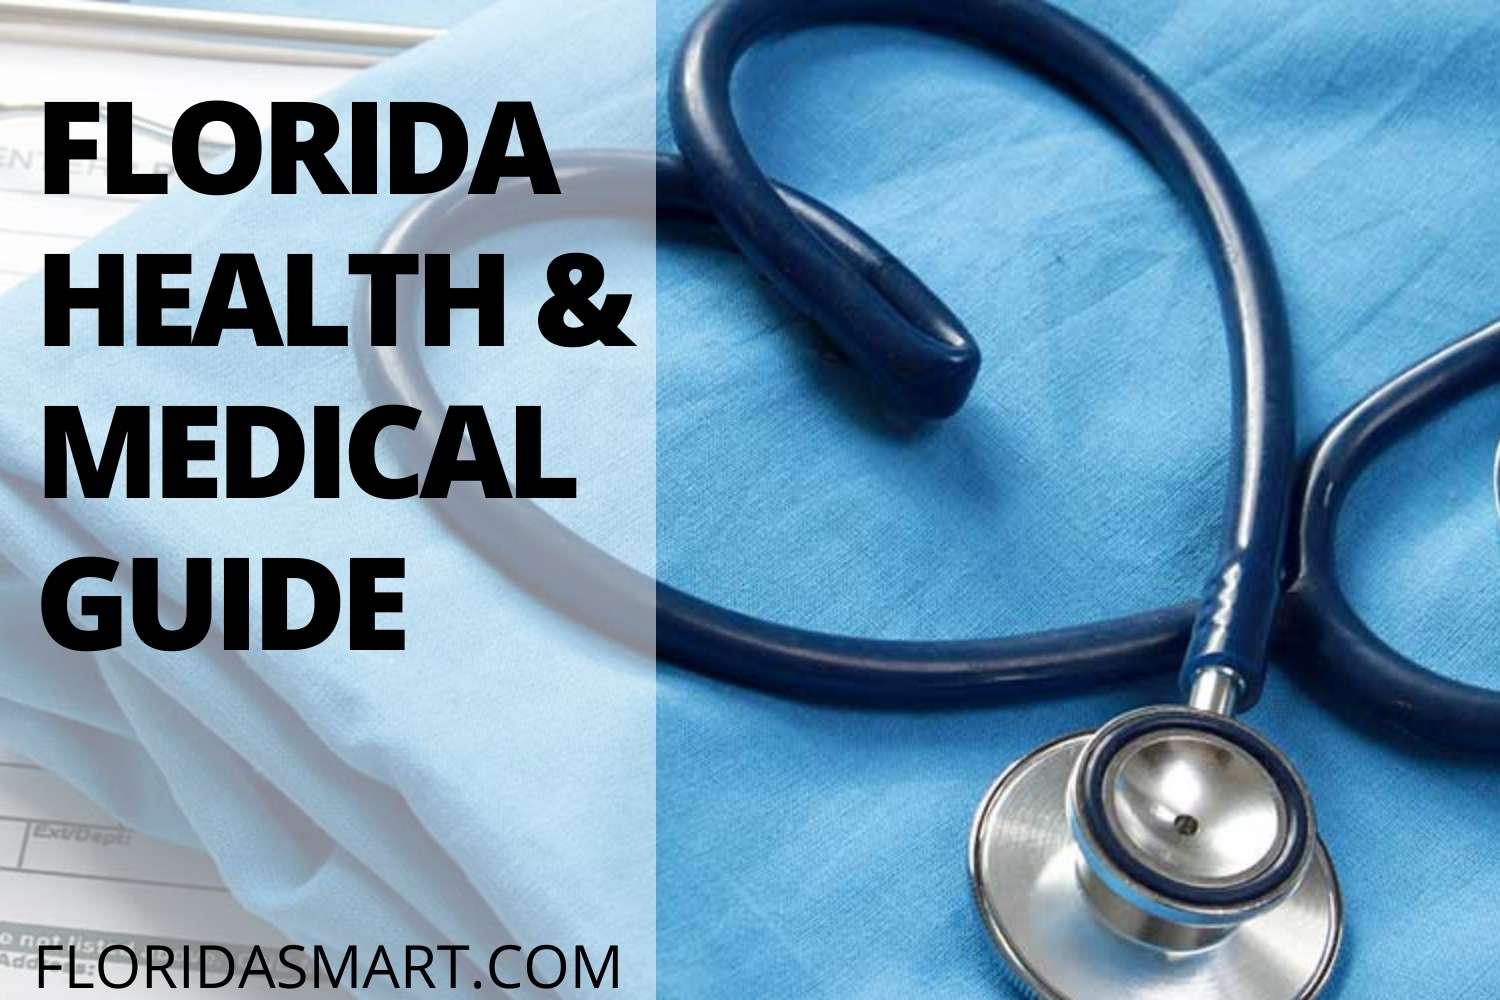 The Ultimate Florida Health & Medical Directory open to the Medical community